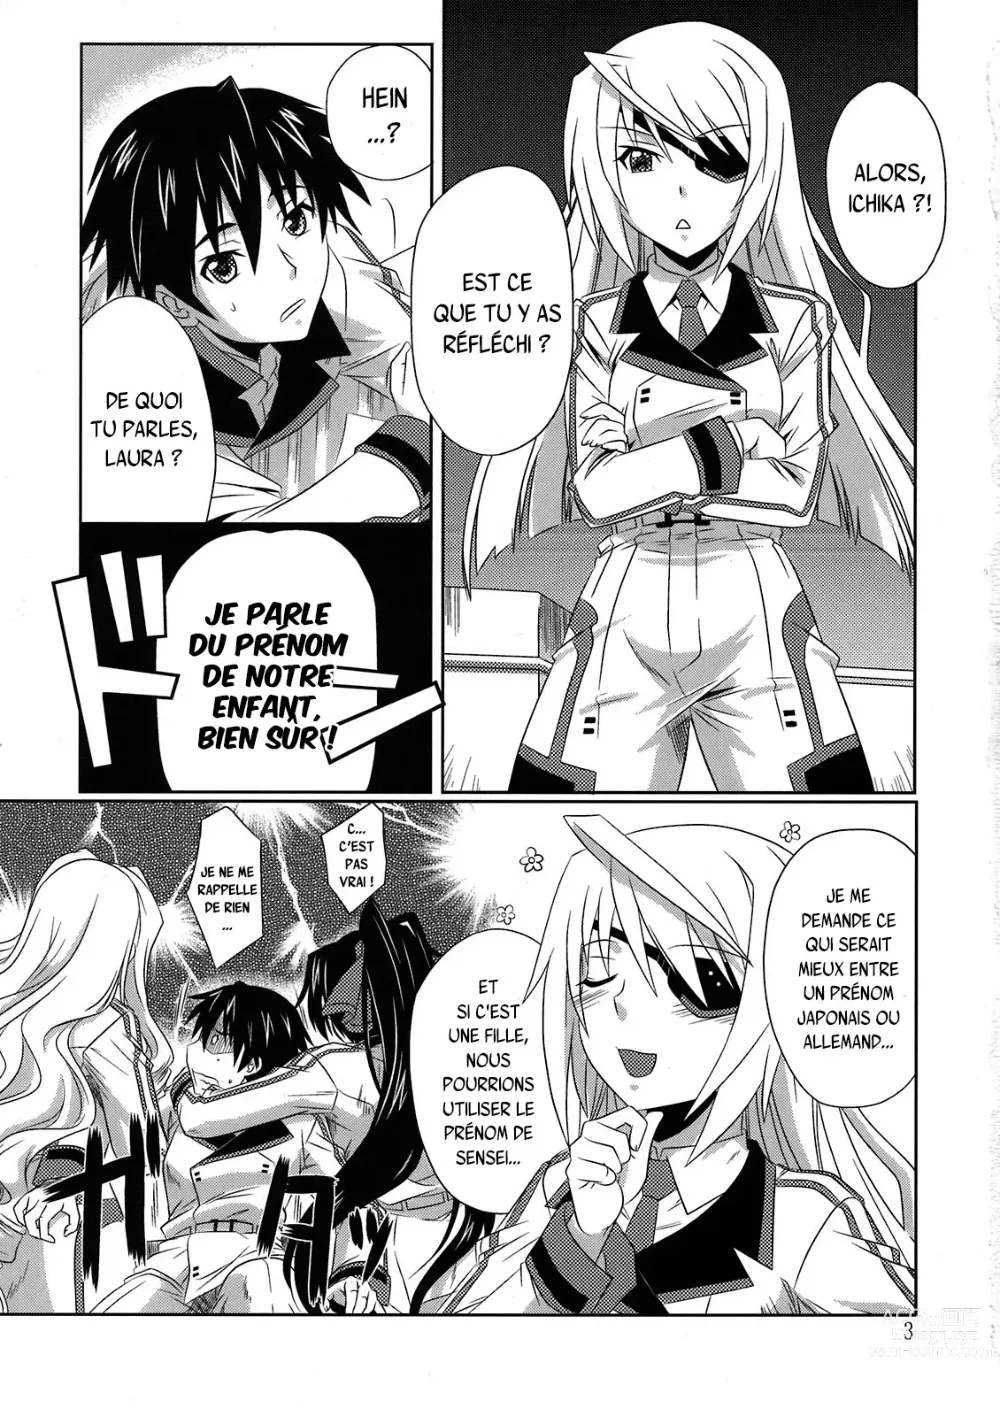 Page 3 of doujinshi is Incest Strategy (decensored)